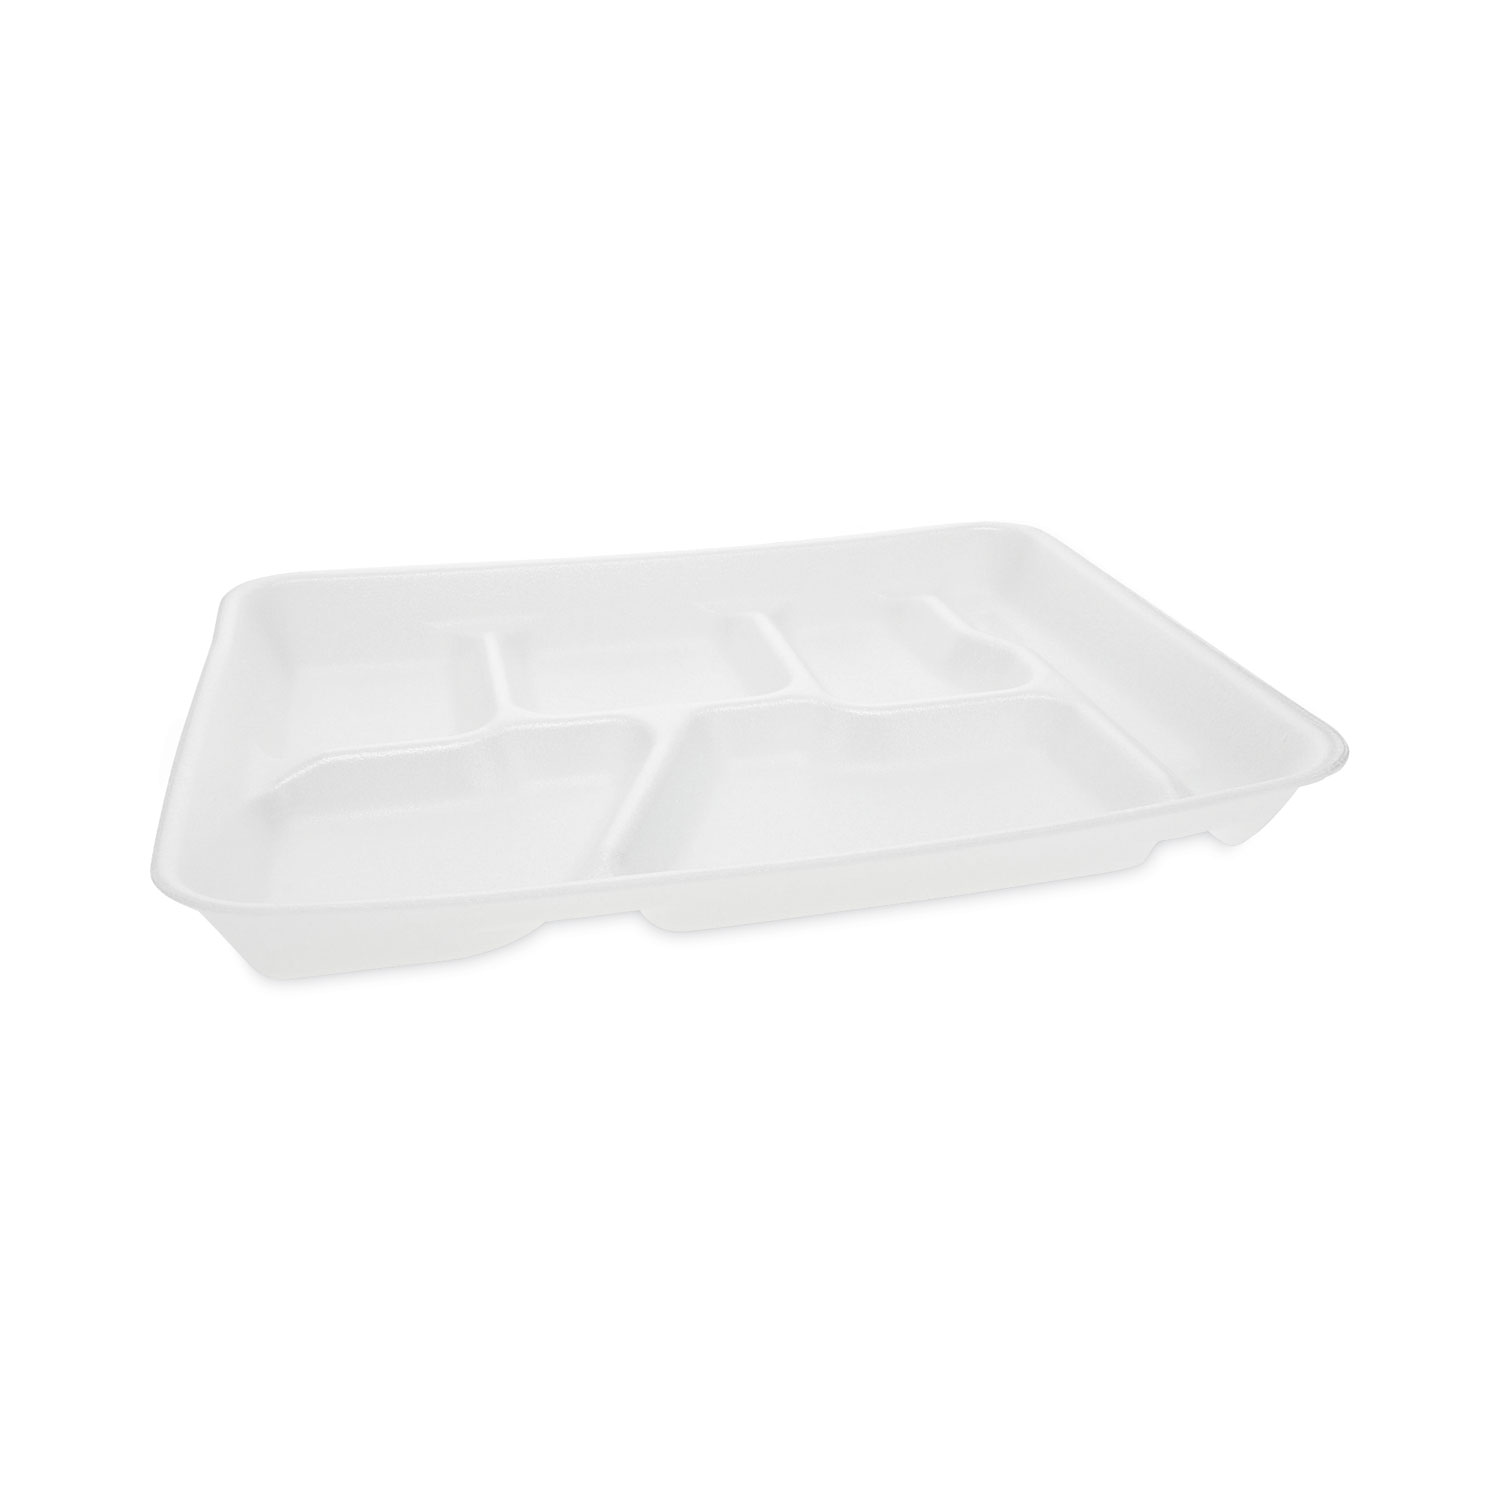 School Lunch Tray 5 Compartment